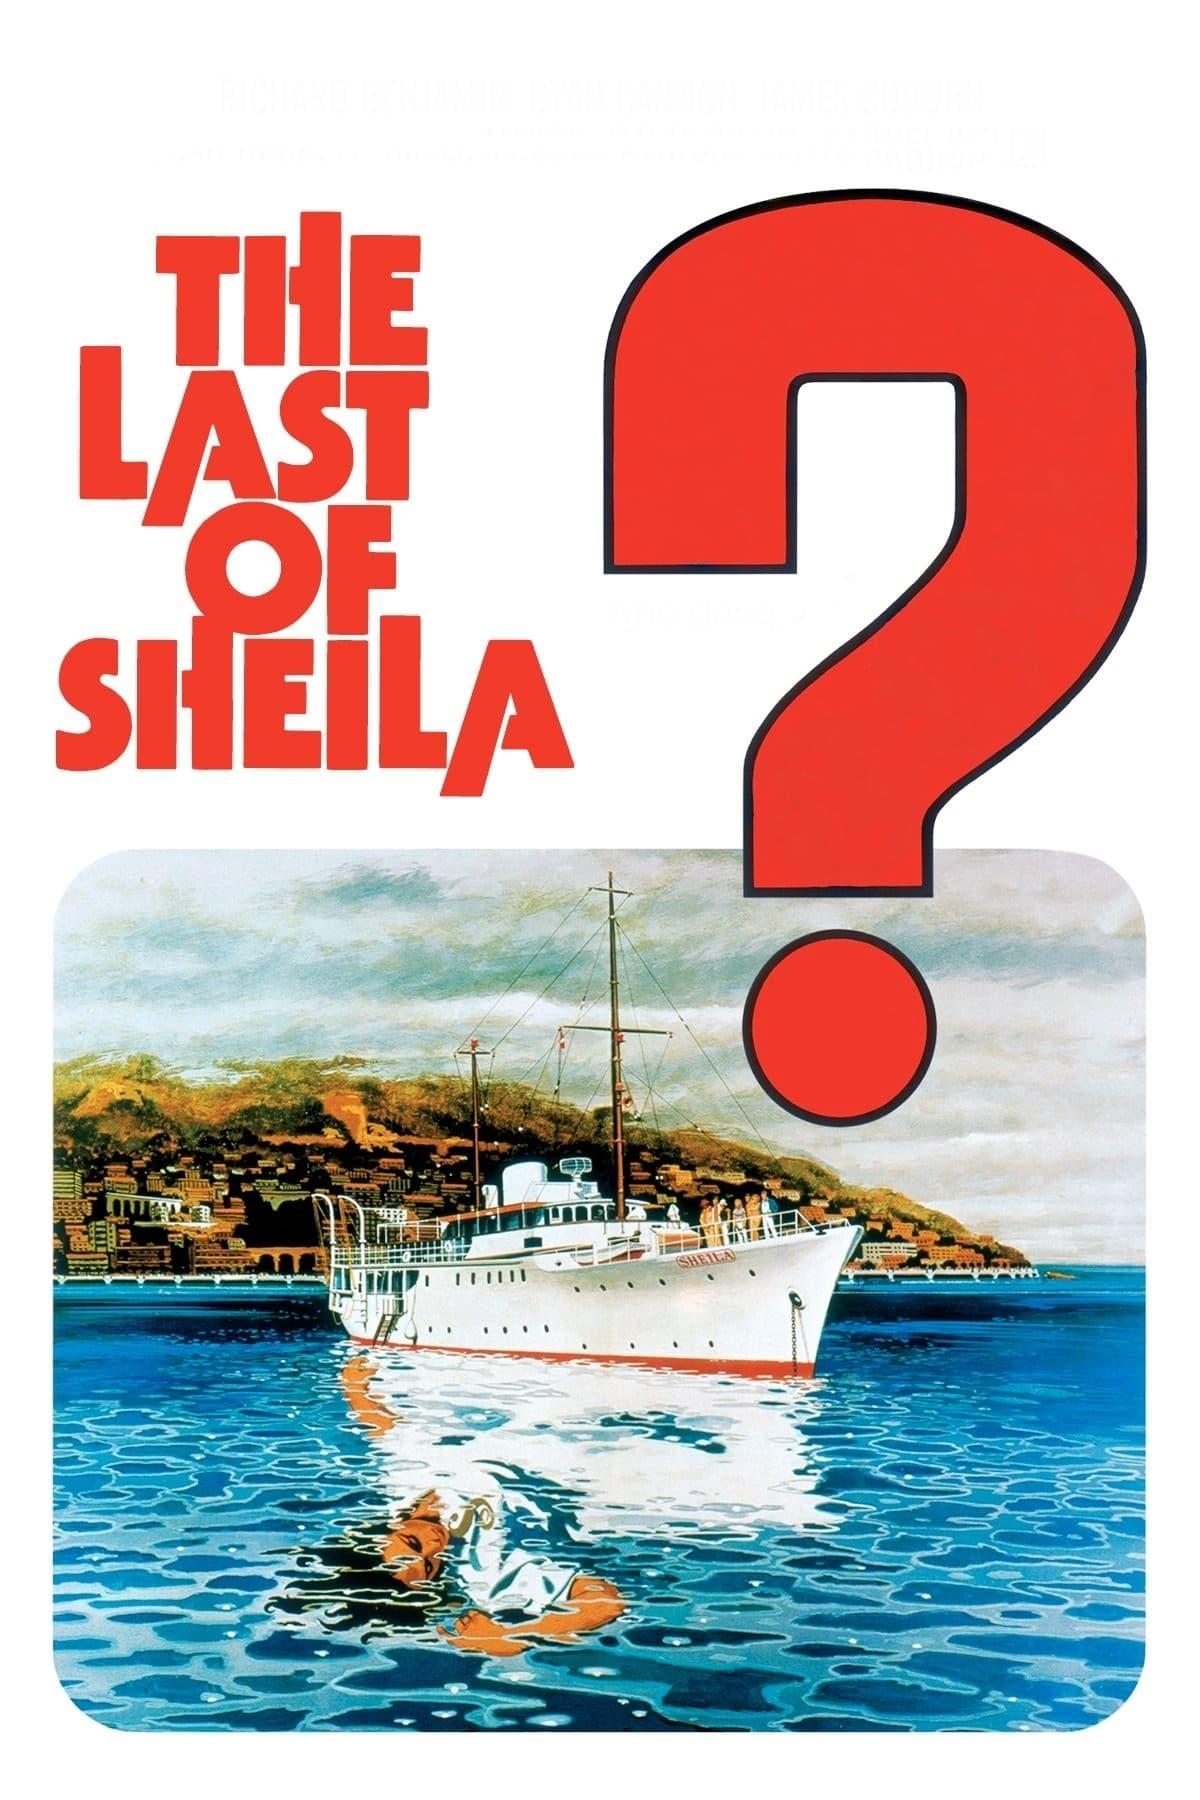 The Last of Sheila poster